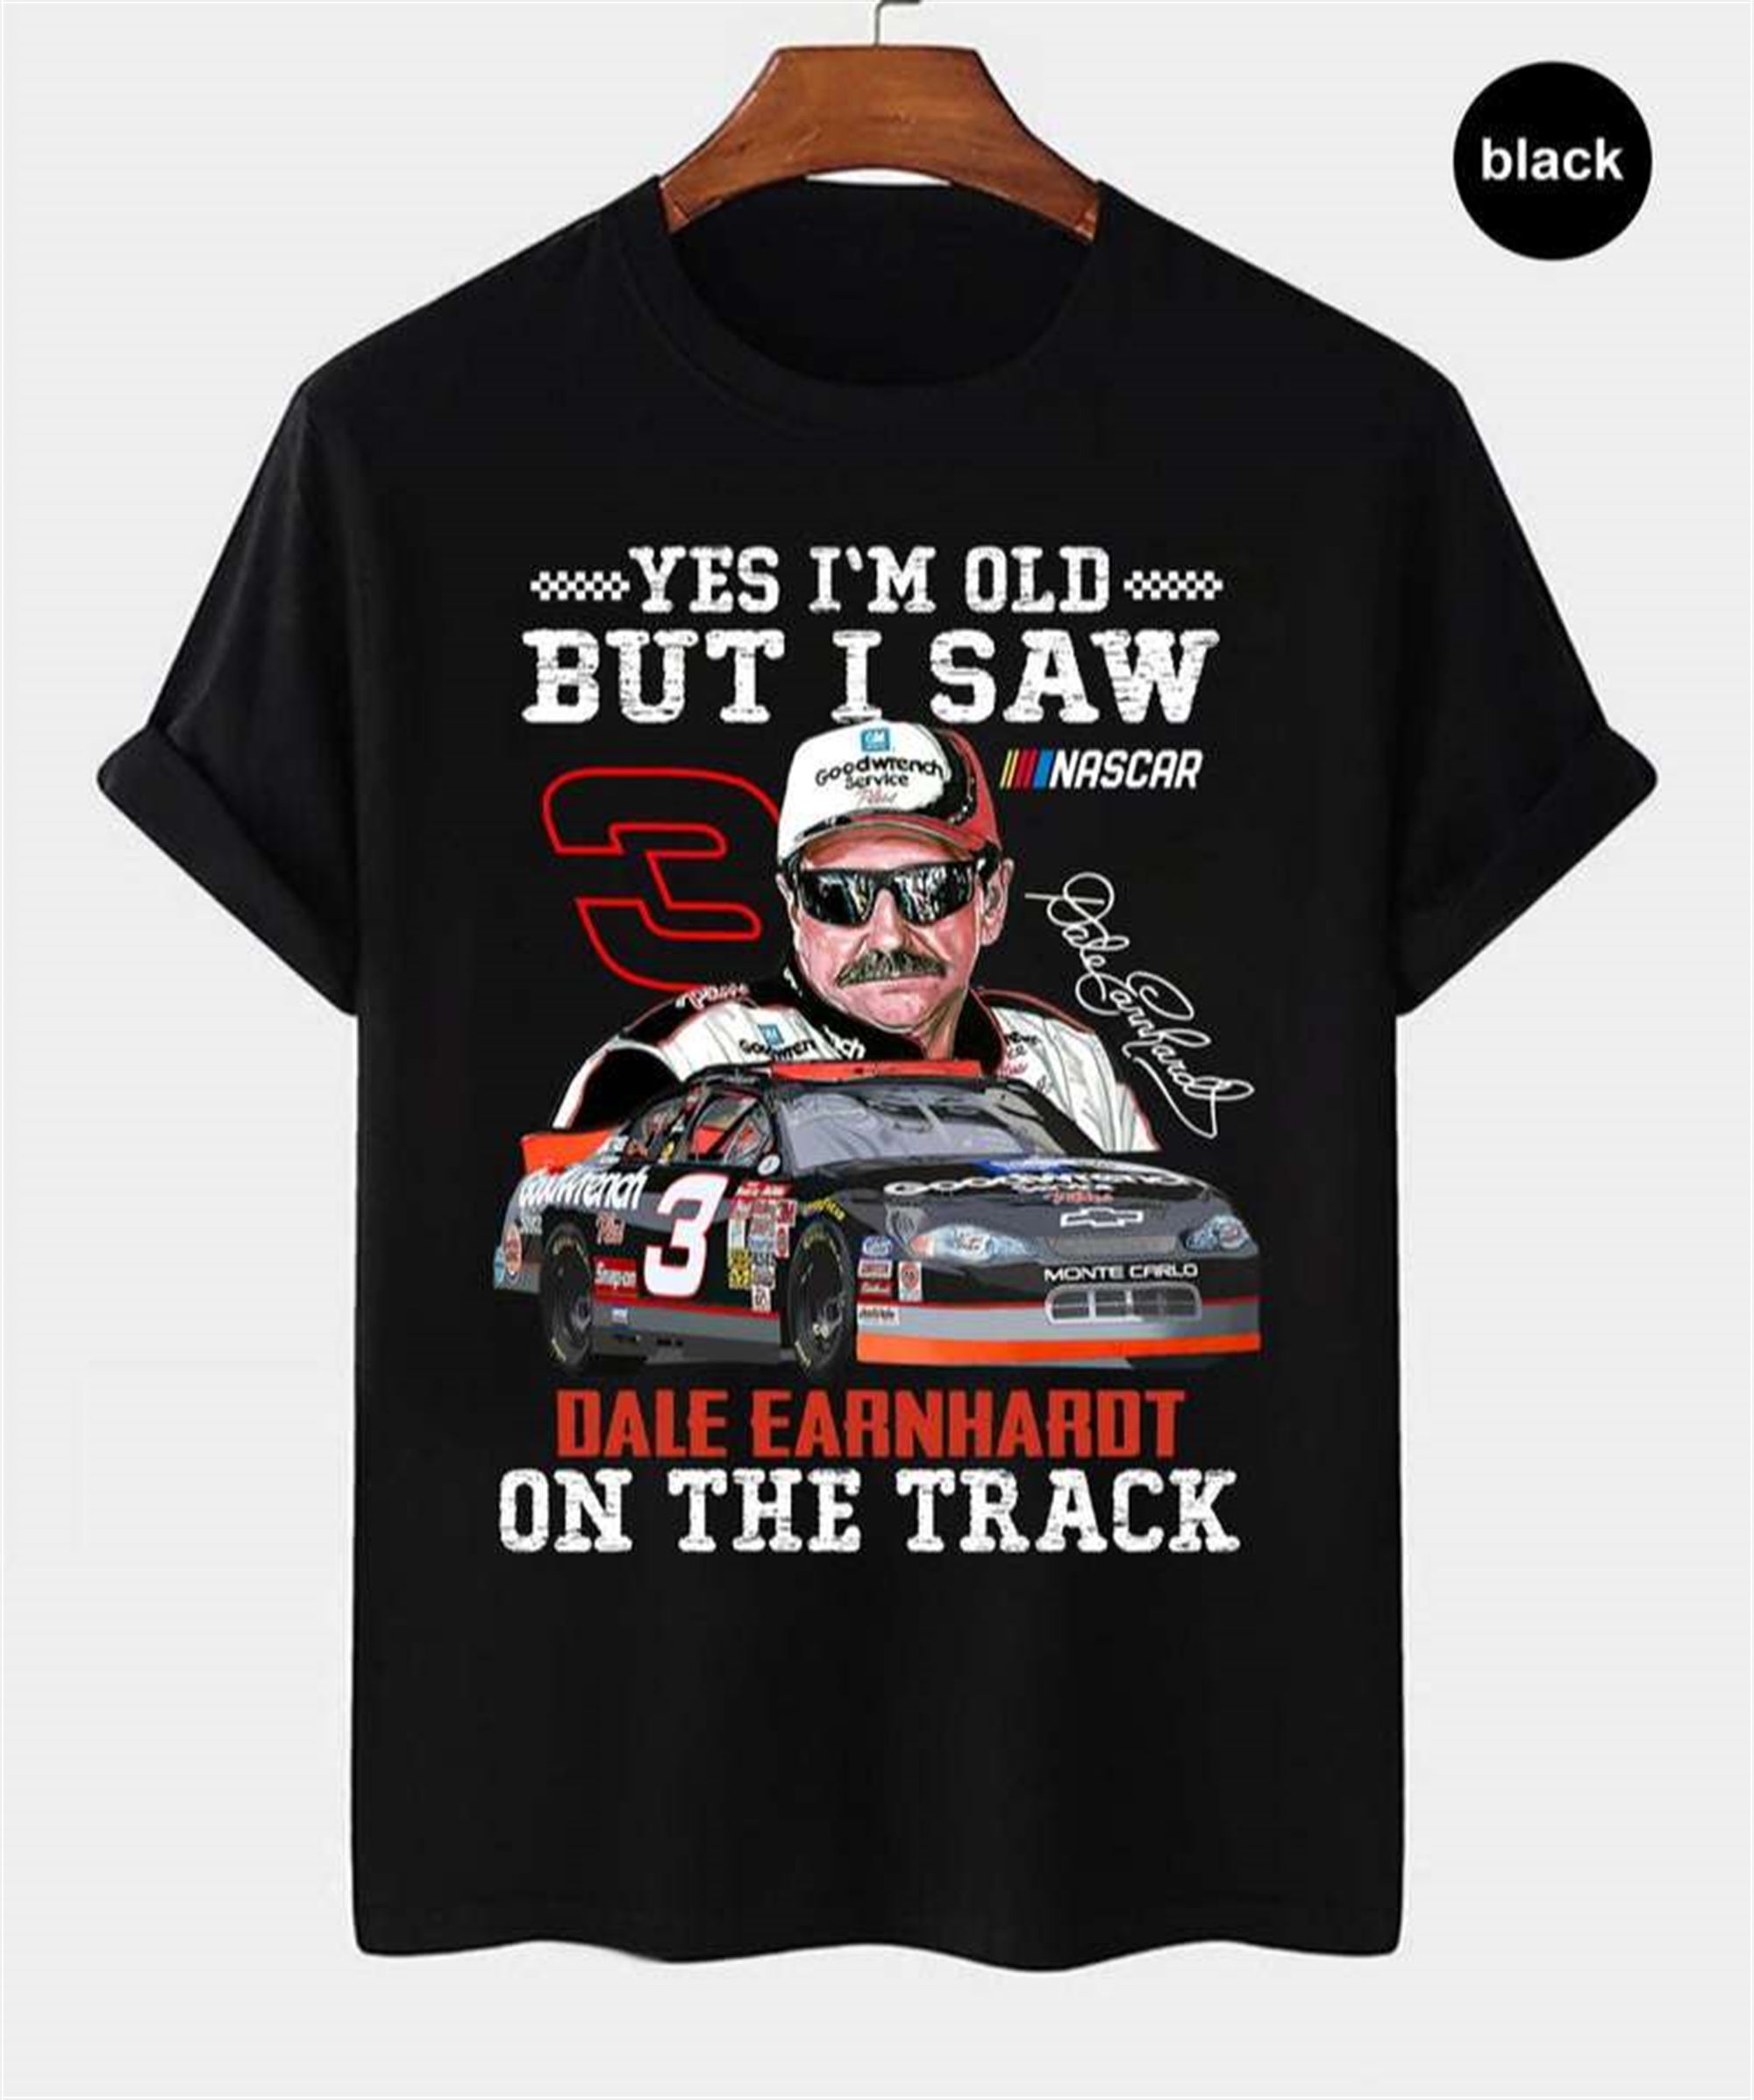 Im Old But I Saw Dale Earnhardt On The Track Number 3 T Shirt Plus Size Up To 5xl